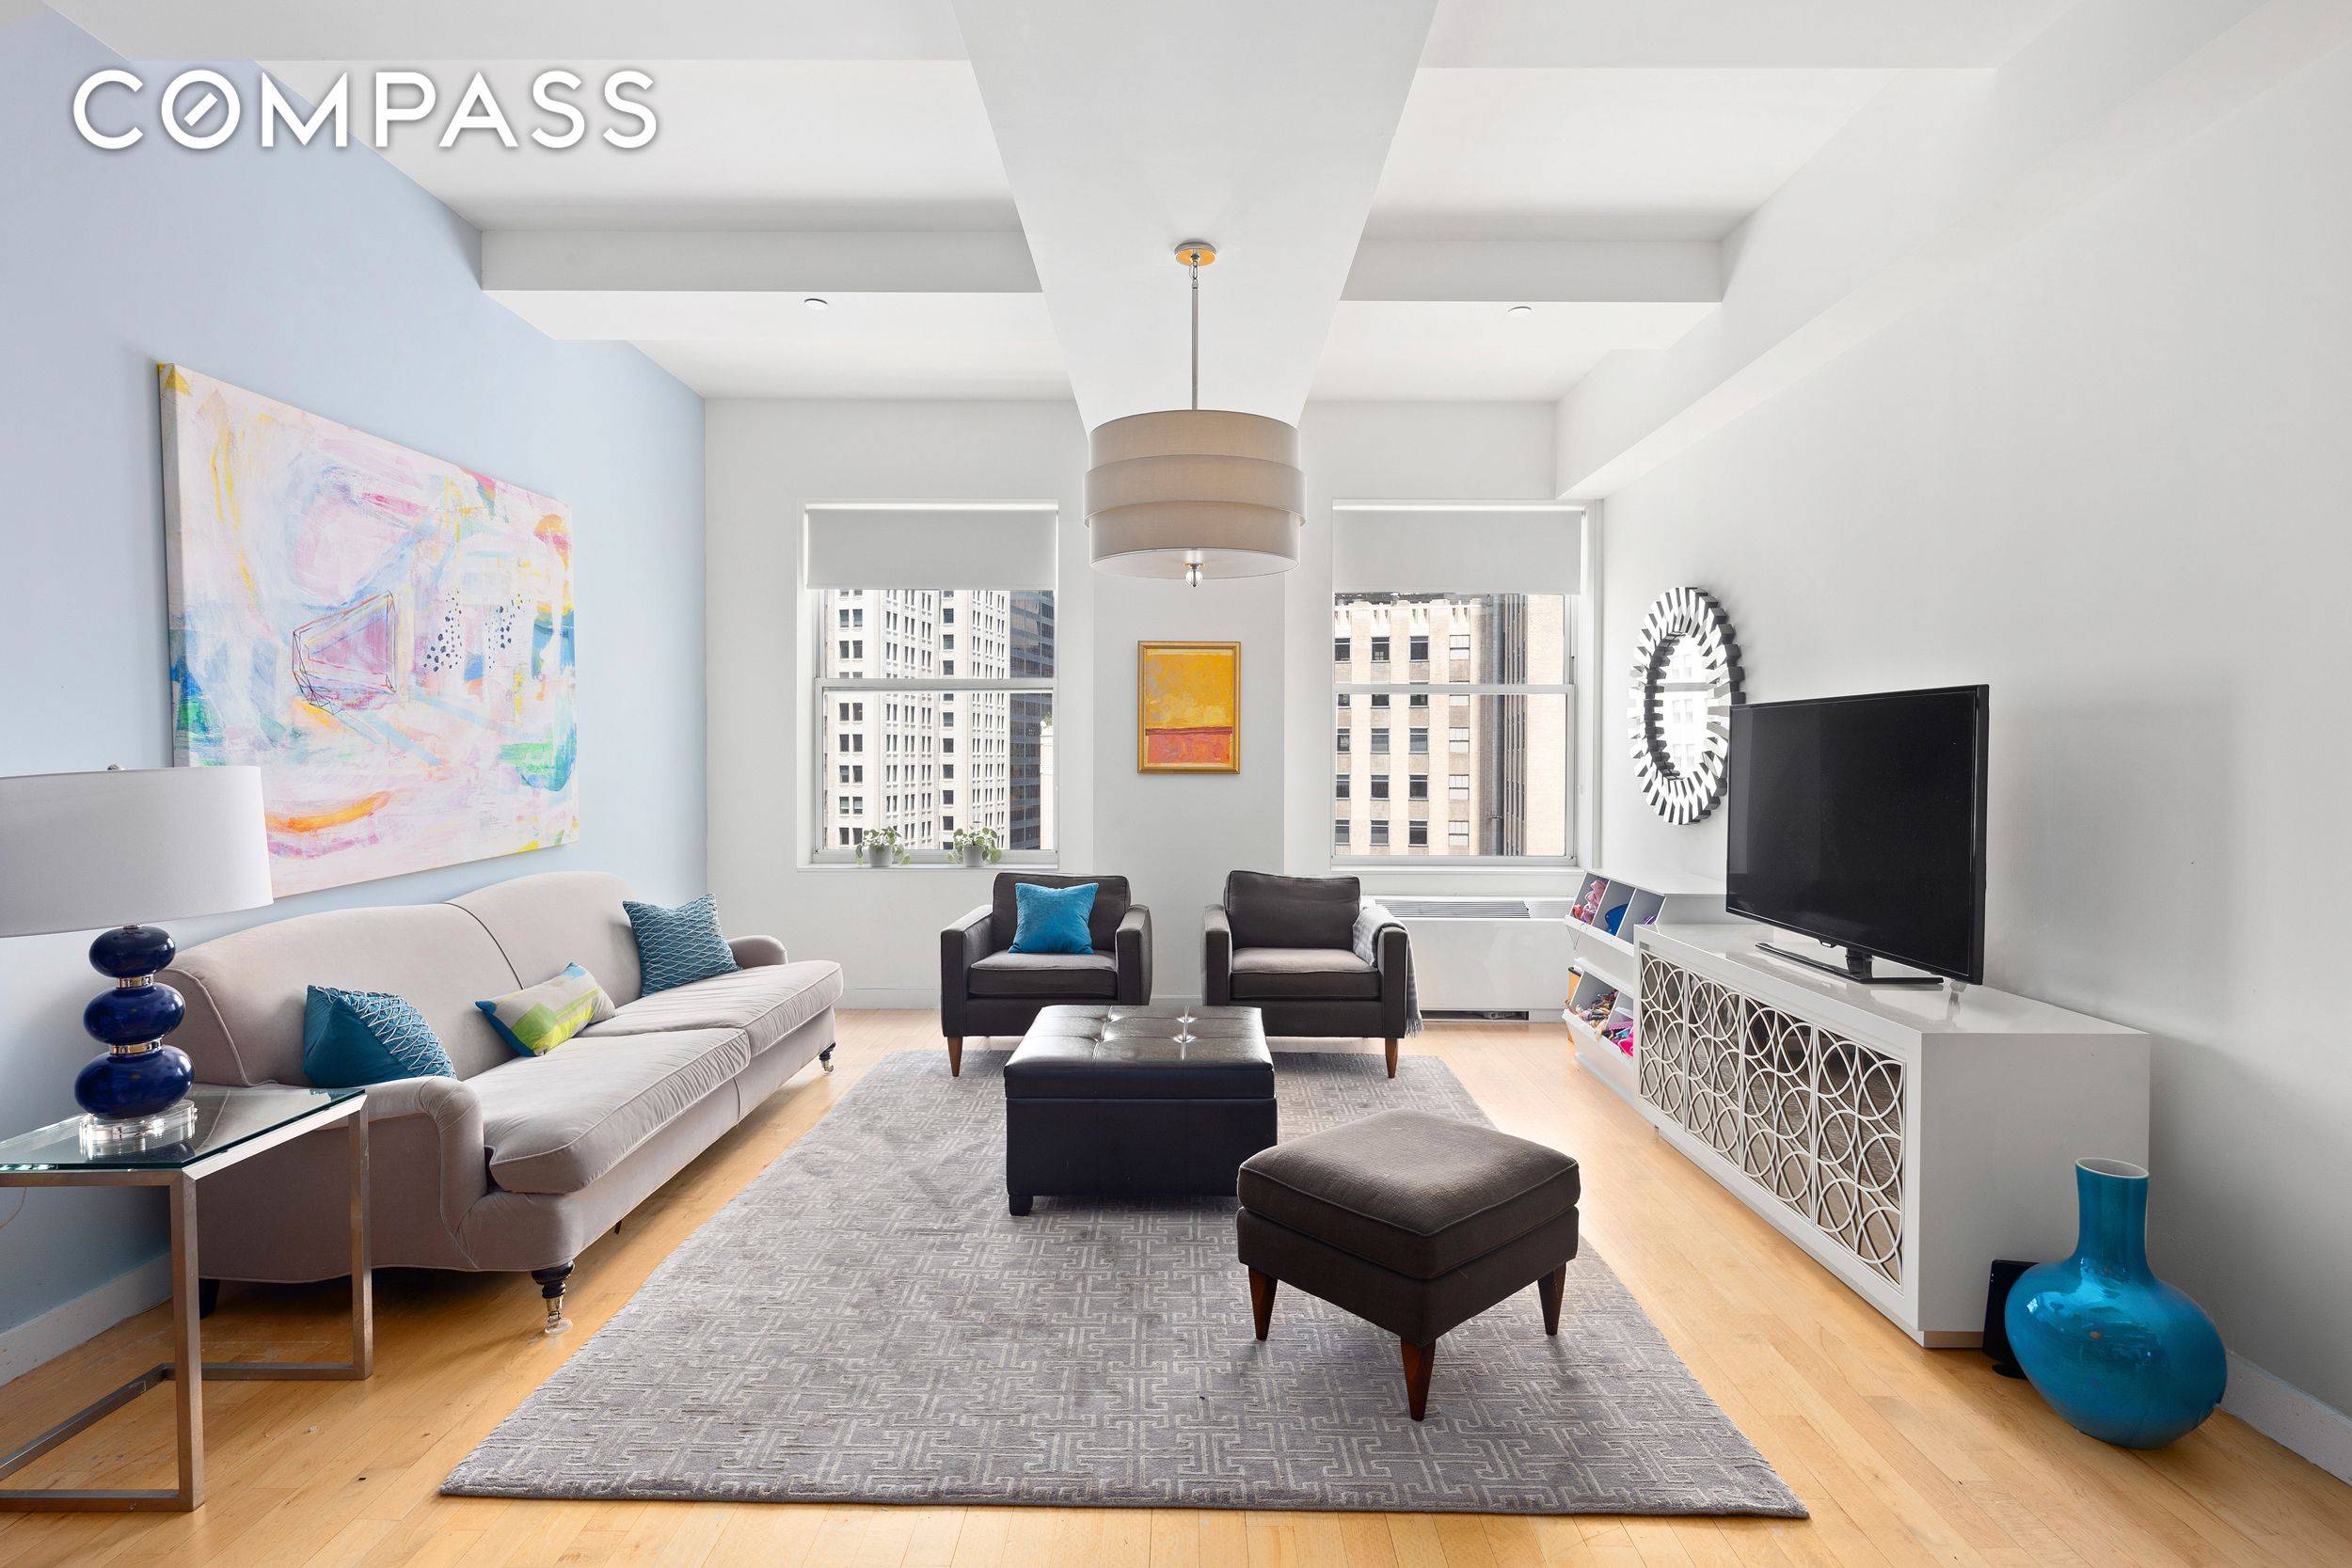 THE APARTMENT Apartment 2404 is a 1608sf loft with one of the most highly sought after layouts in 15 Broad Street, thanks to its function, style and comfort.